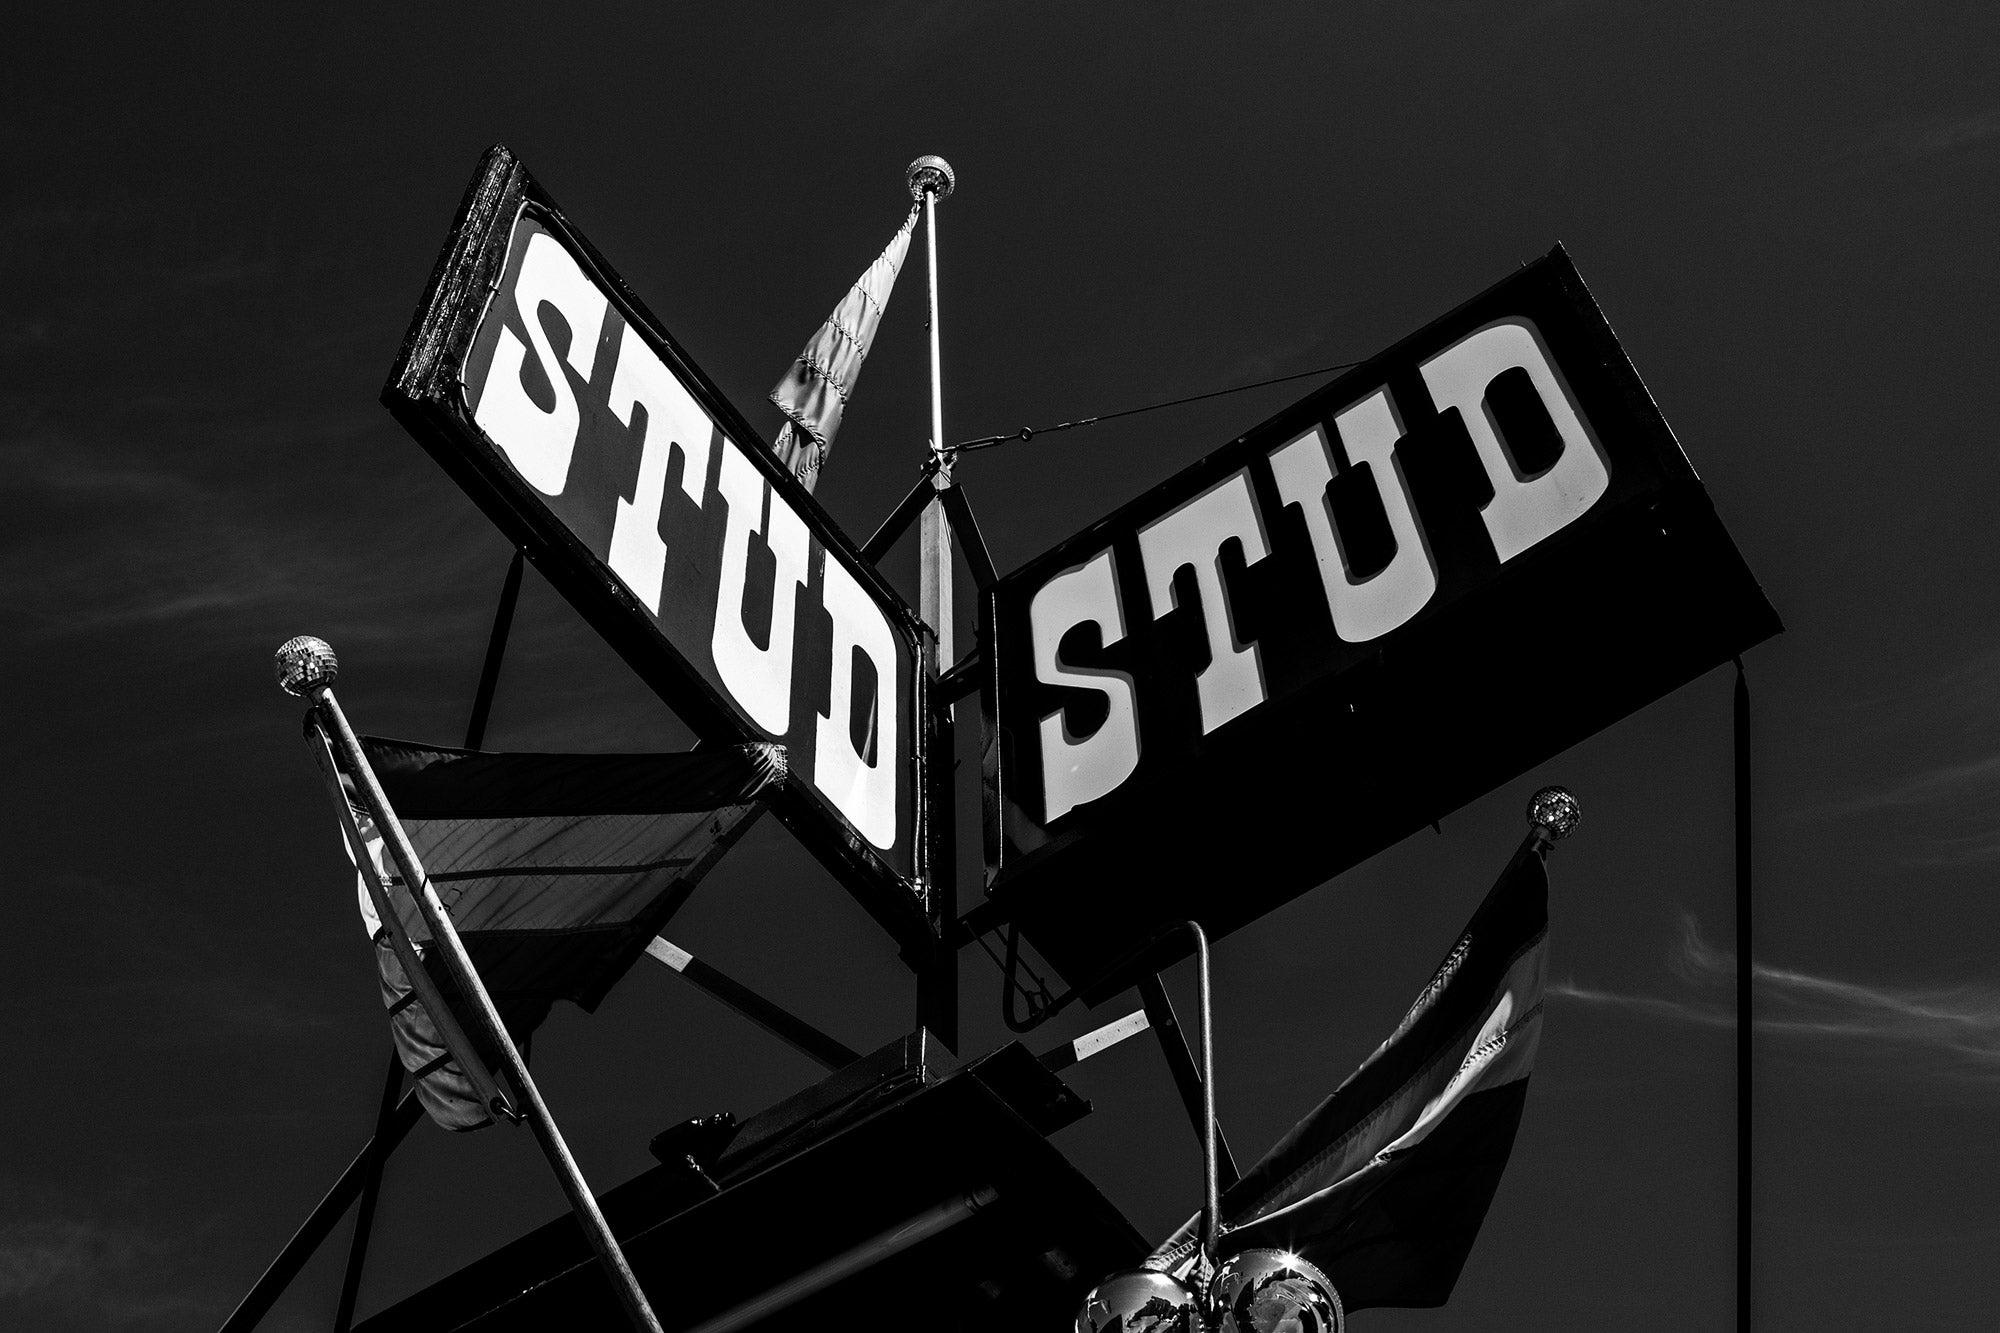 Stud and More, Landscape black and white limited edition photograph - Photograph by Juan Pablo Castro